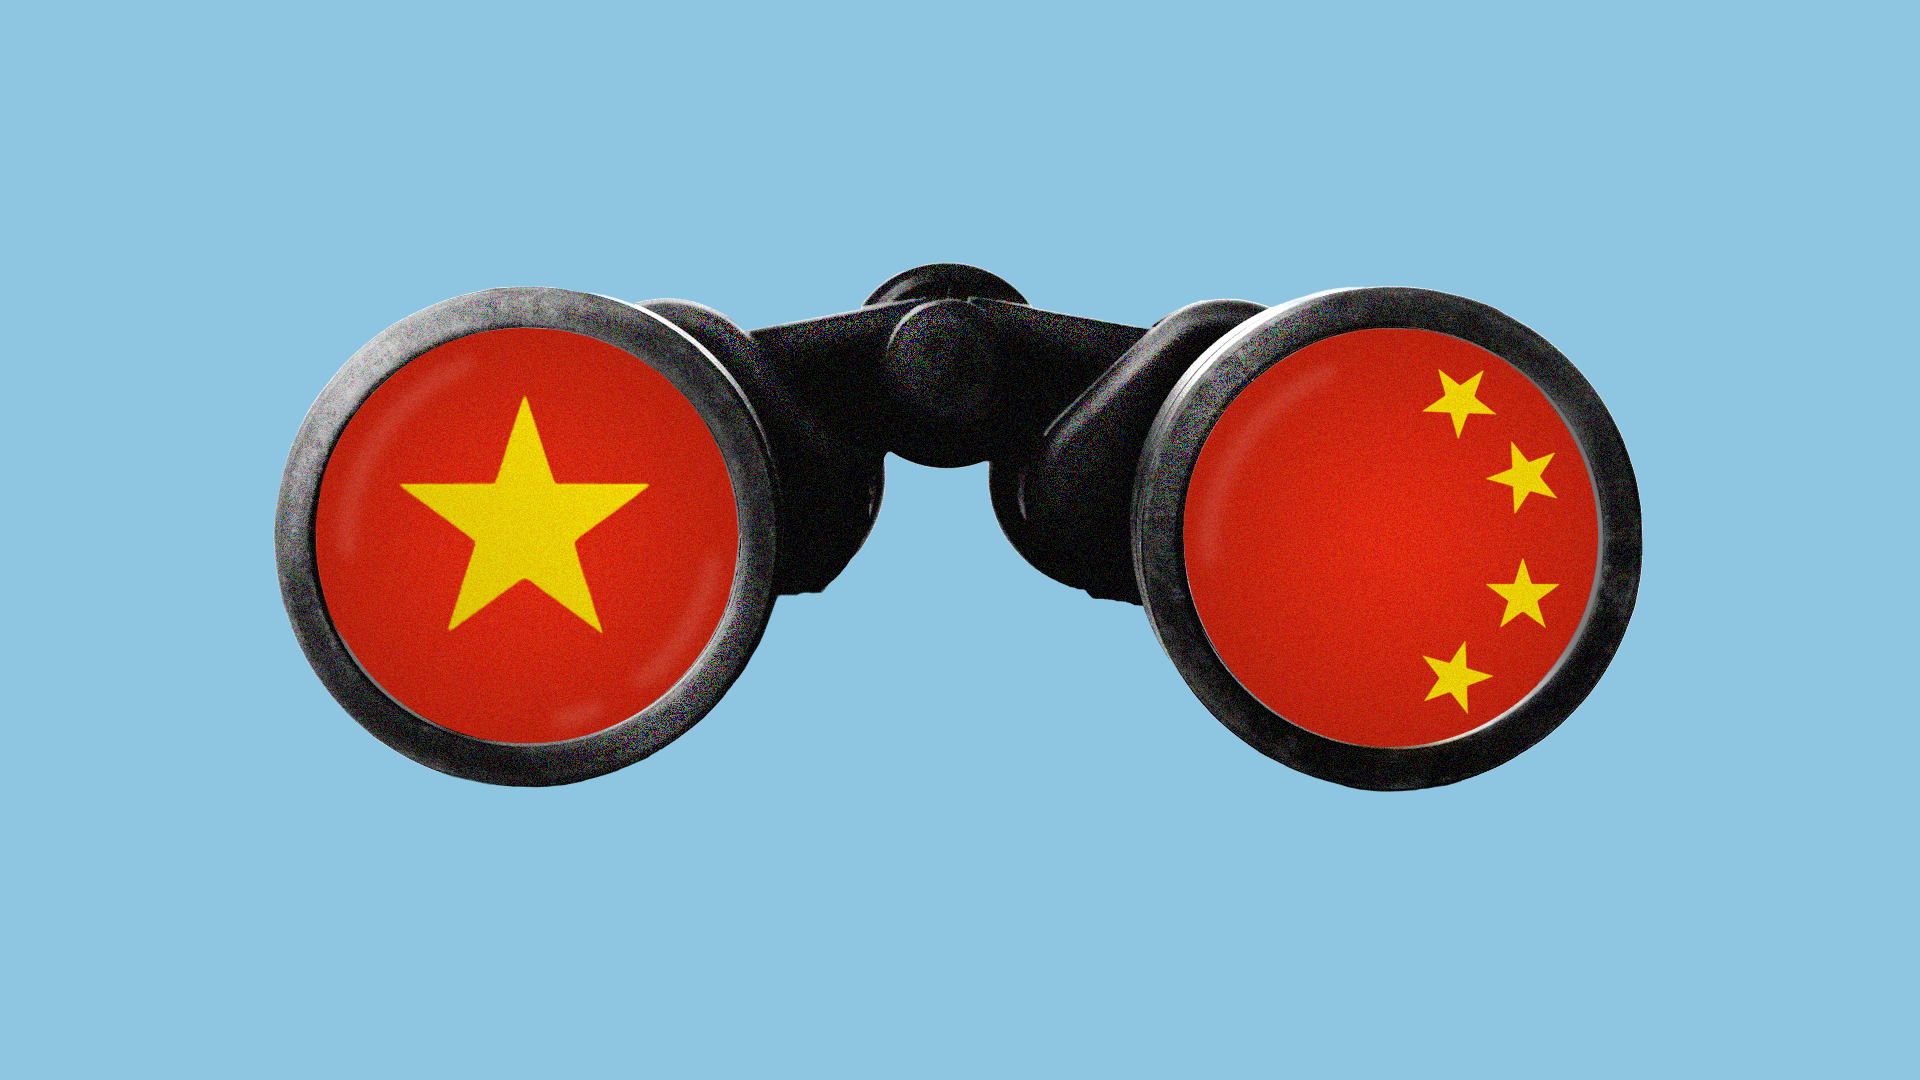 Illustration of binoculars with the Chinese flag in the lenses